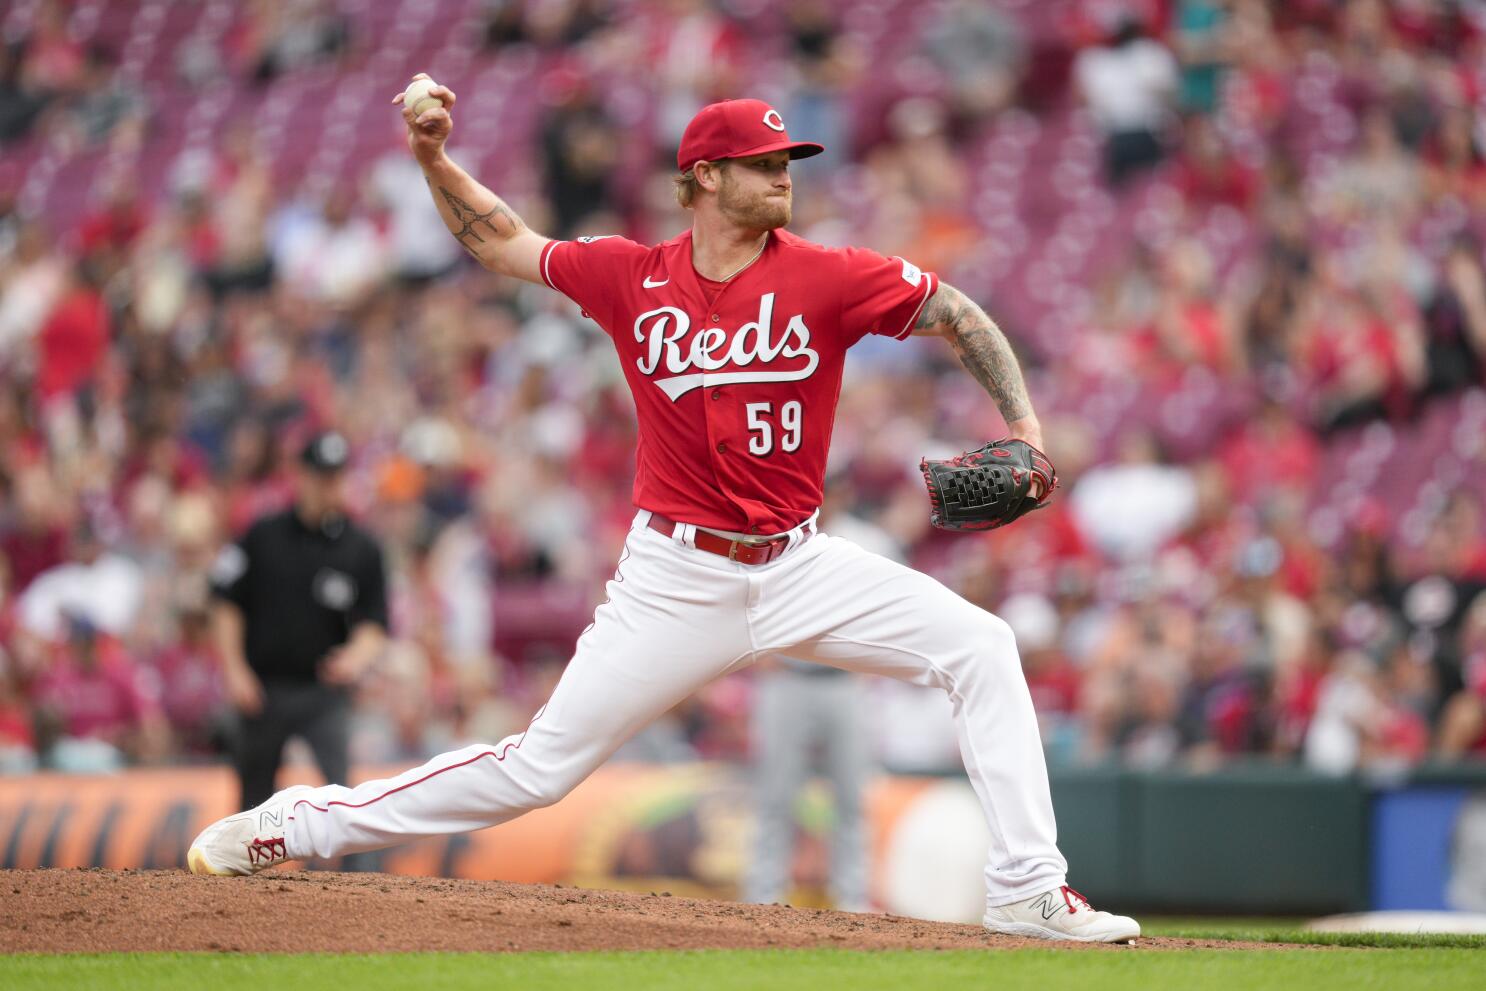 Reds Pitcher Expected To Recover After Line Drive To Face : The Two-Way :  NPR